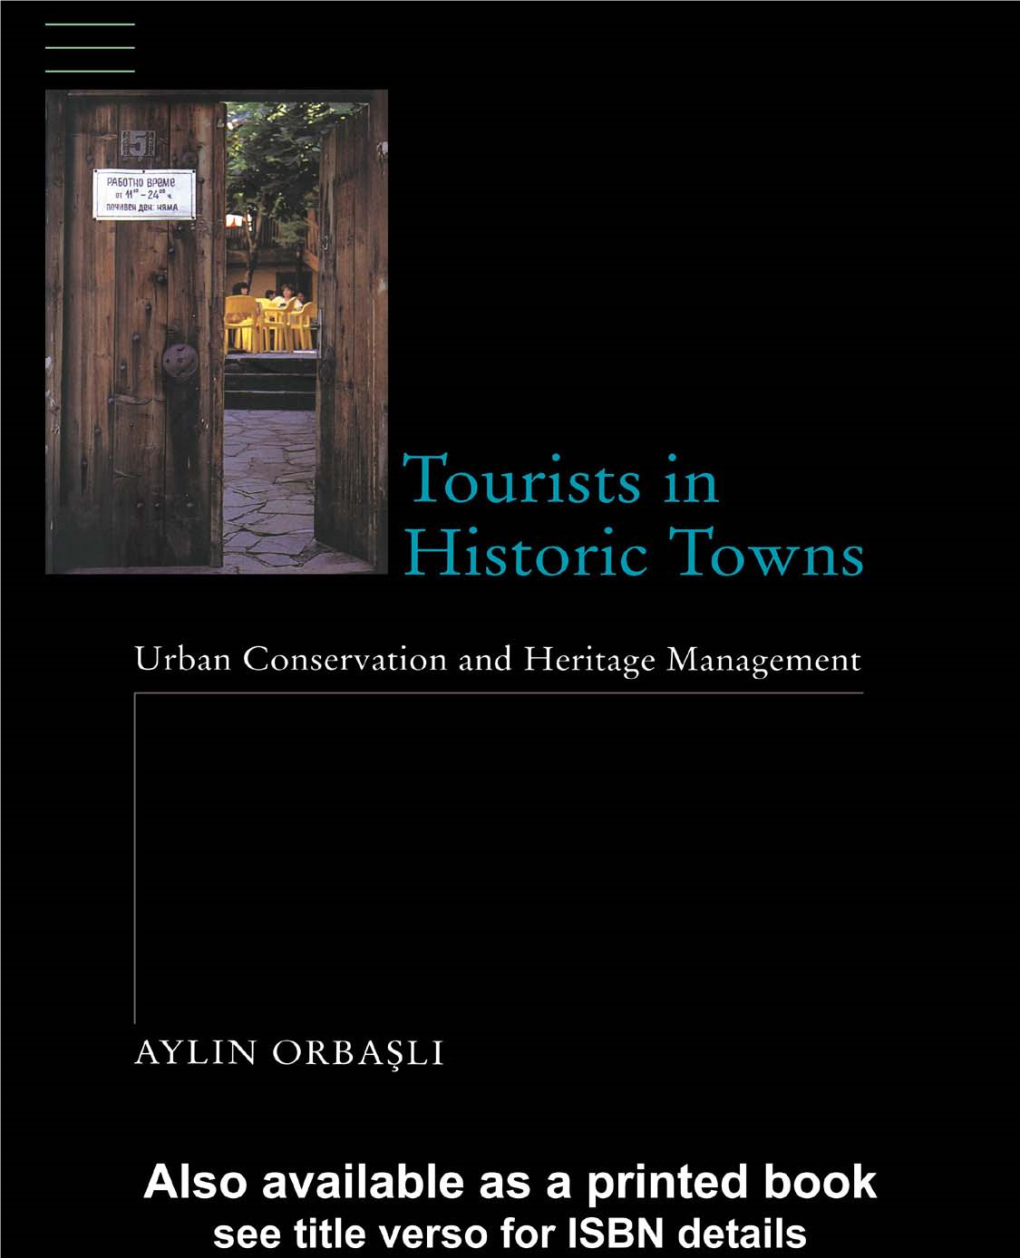 Tourists in Historic Towns: Urban Conservation and Heritage